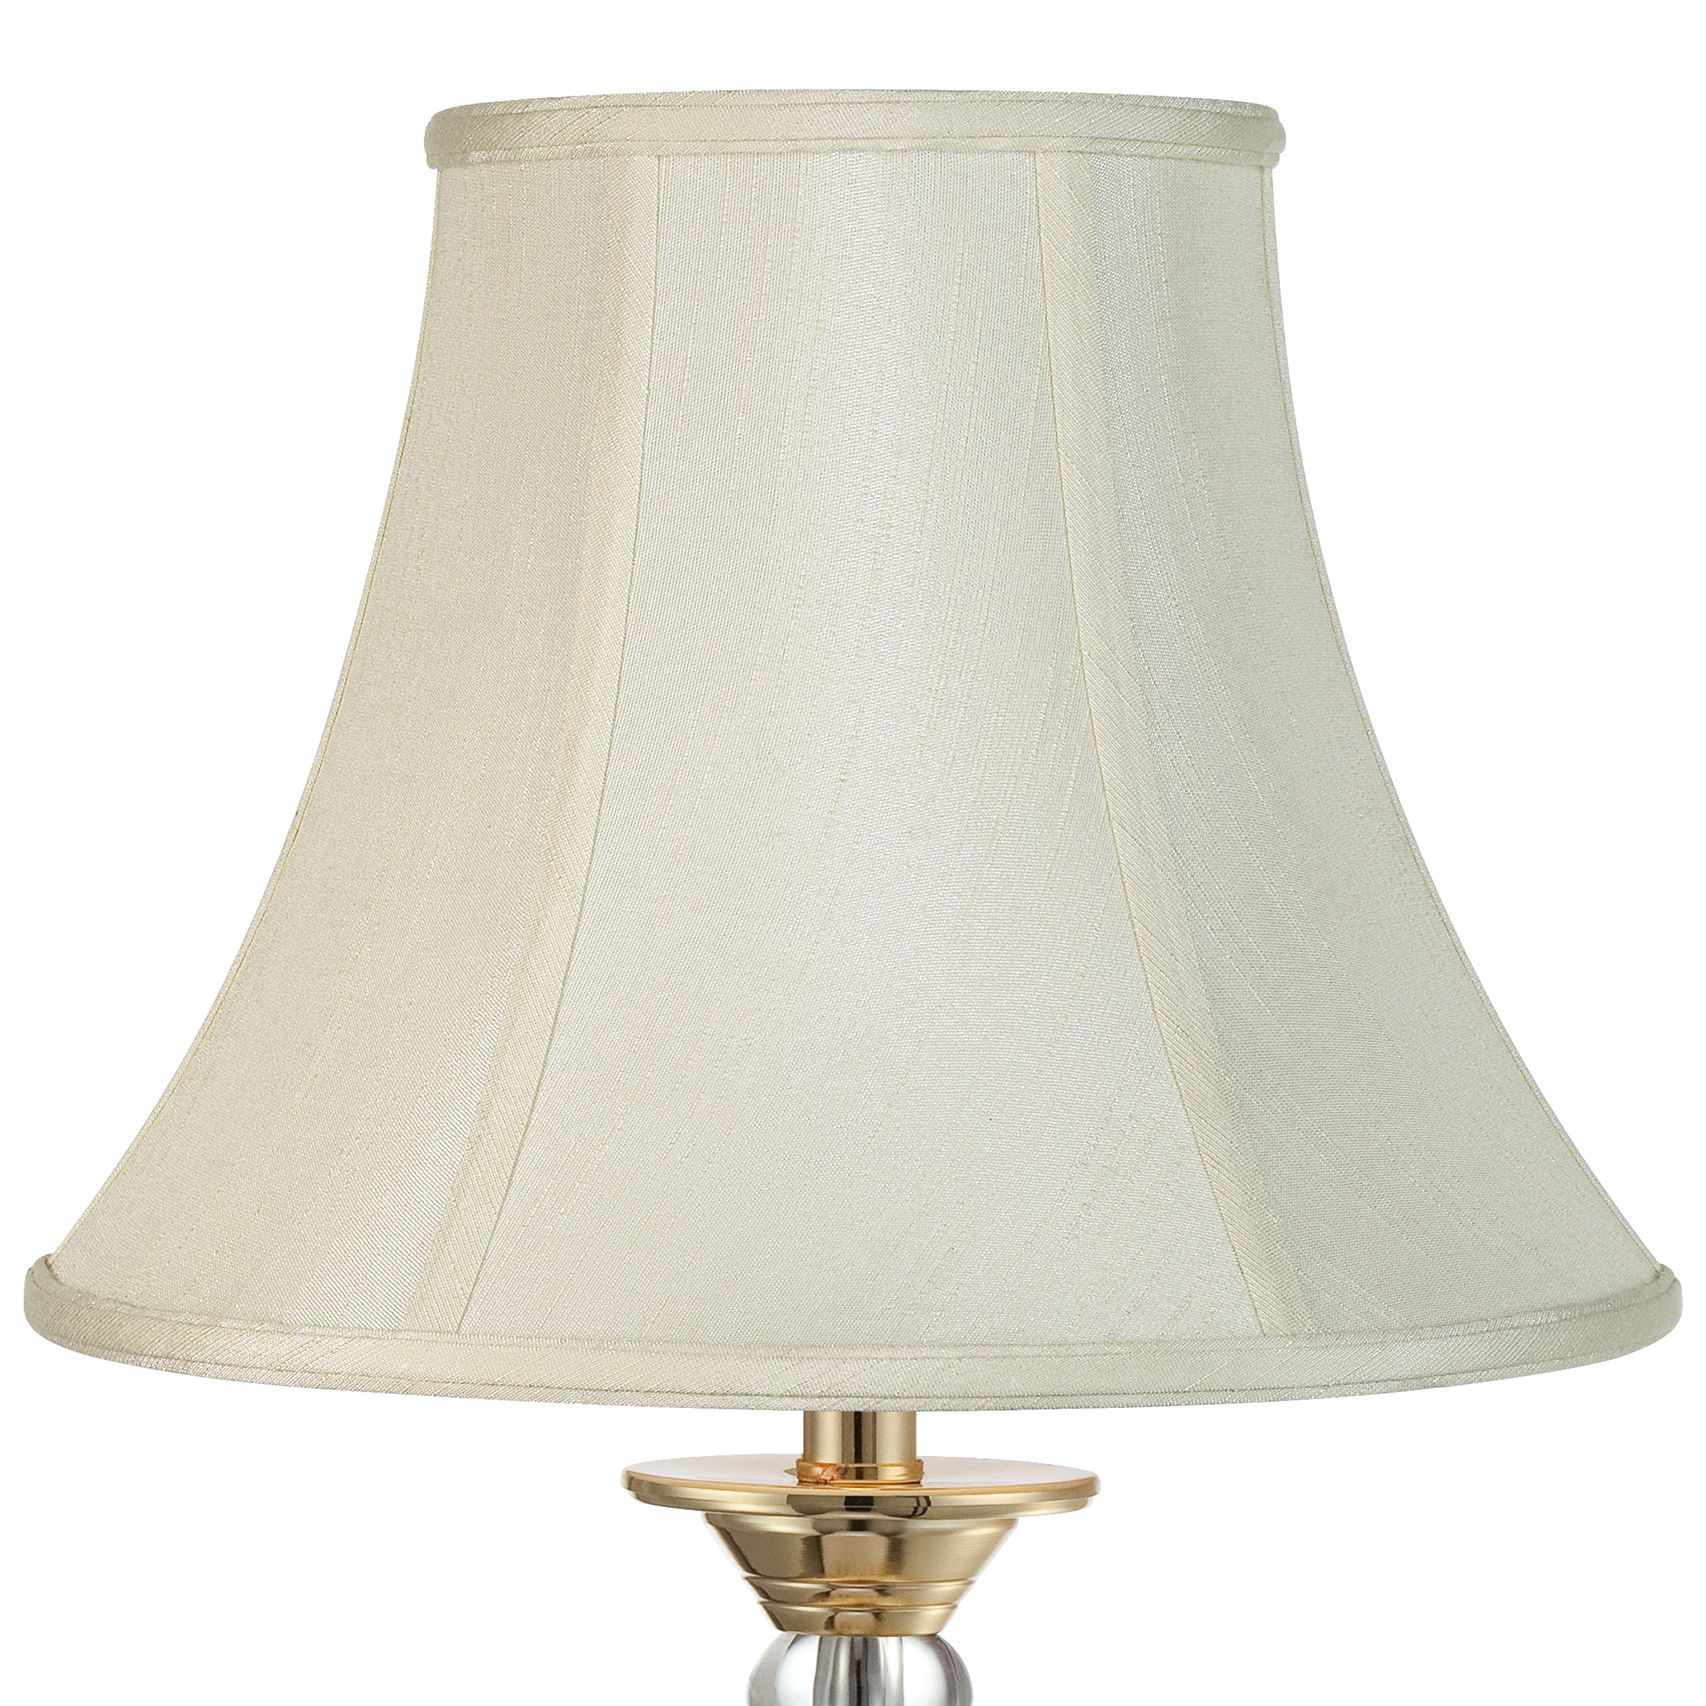 Imperial Collection? Creme Lamp Shade 7x14x11 (Spider)